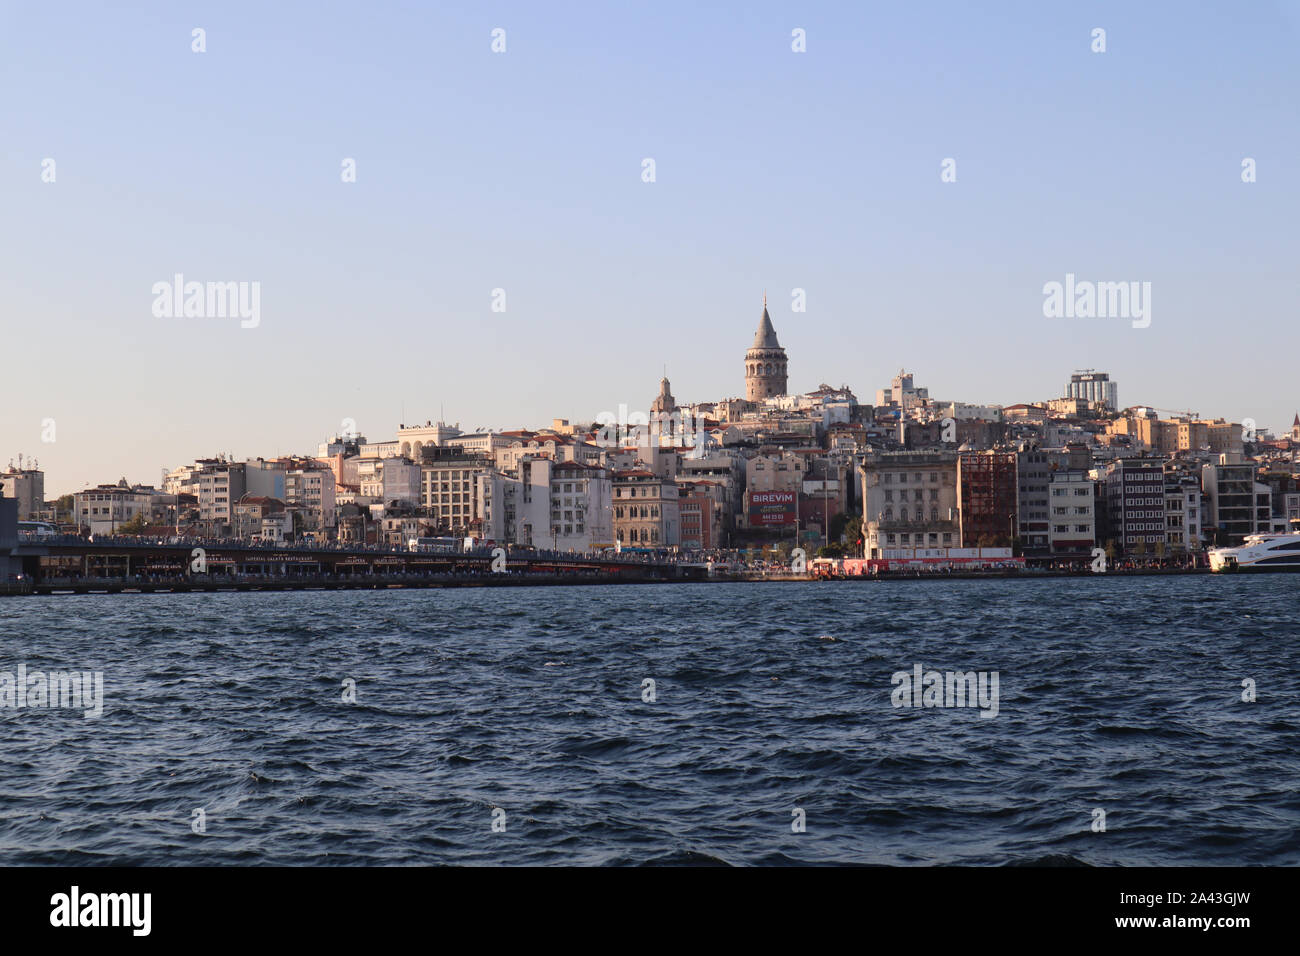 Istanbul, Fatih Eminonu / Turkey - September 14 2019: The beautiful old city in Kadikoy and Galata tower in the back. Stock Photo